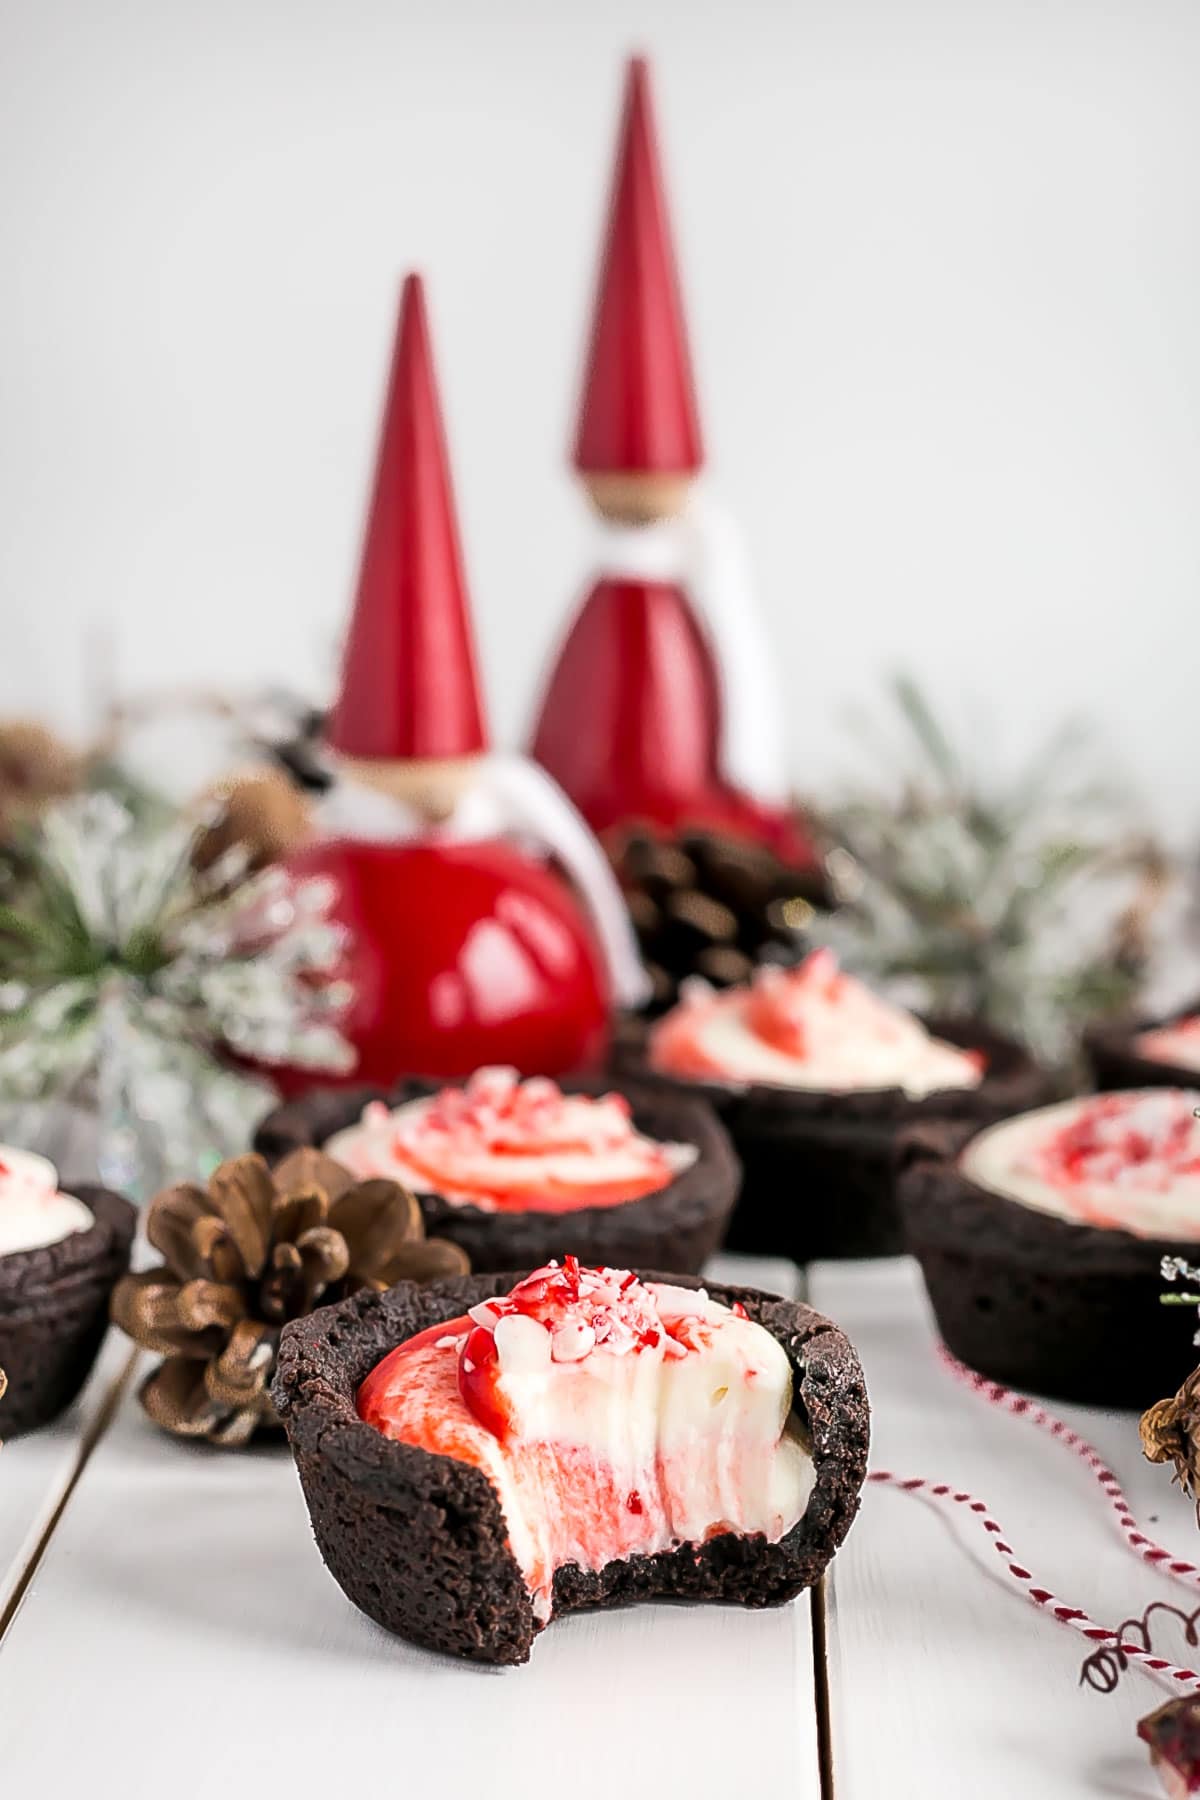 Cookie cups with holiday decor.